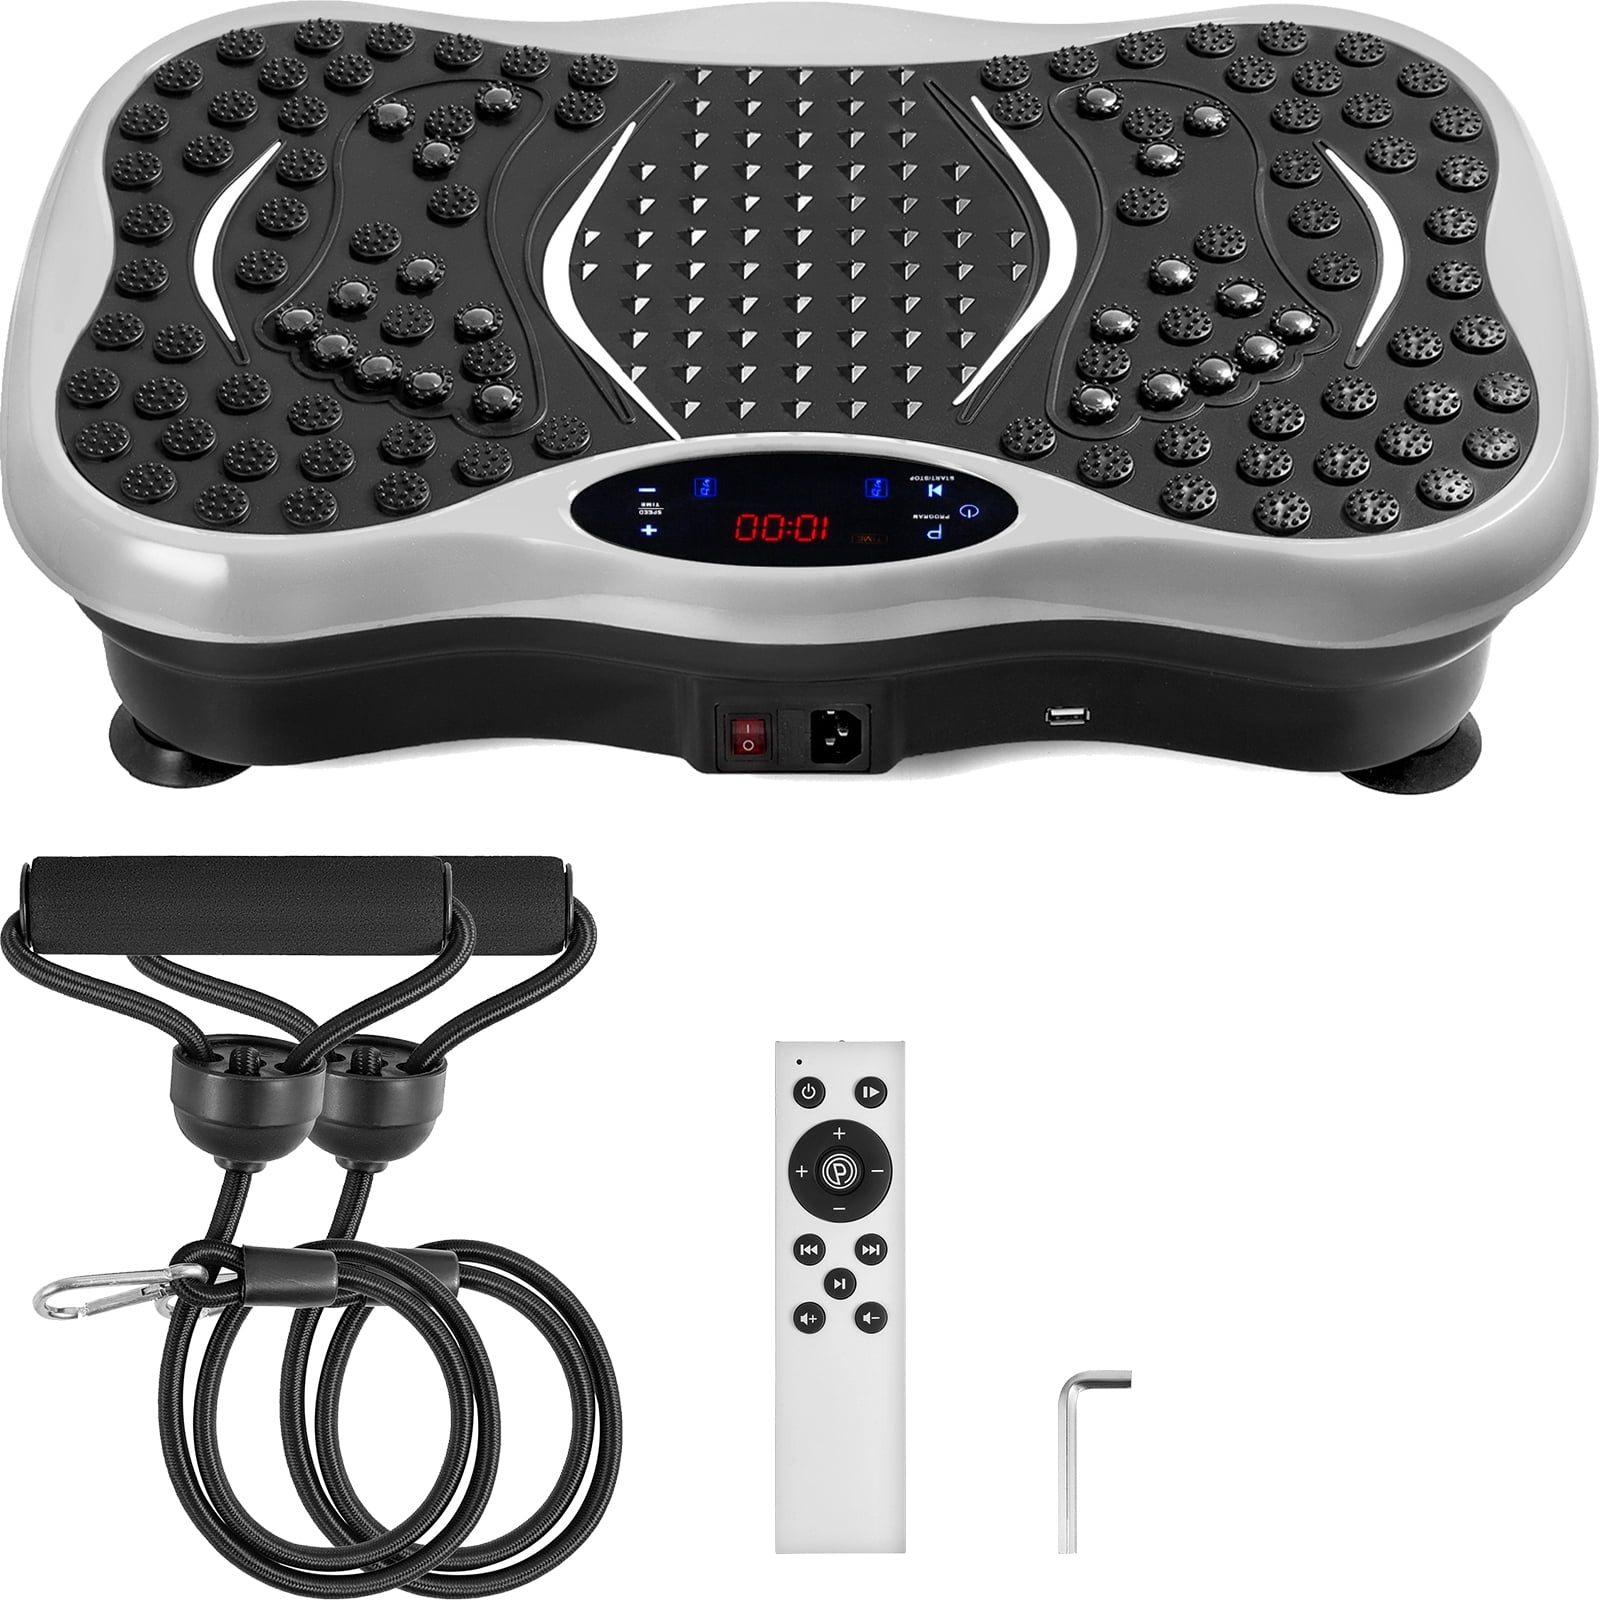 Best Choice Products Full Body Vibration Platform W/ Remote Control Fitness Exer for sale online 